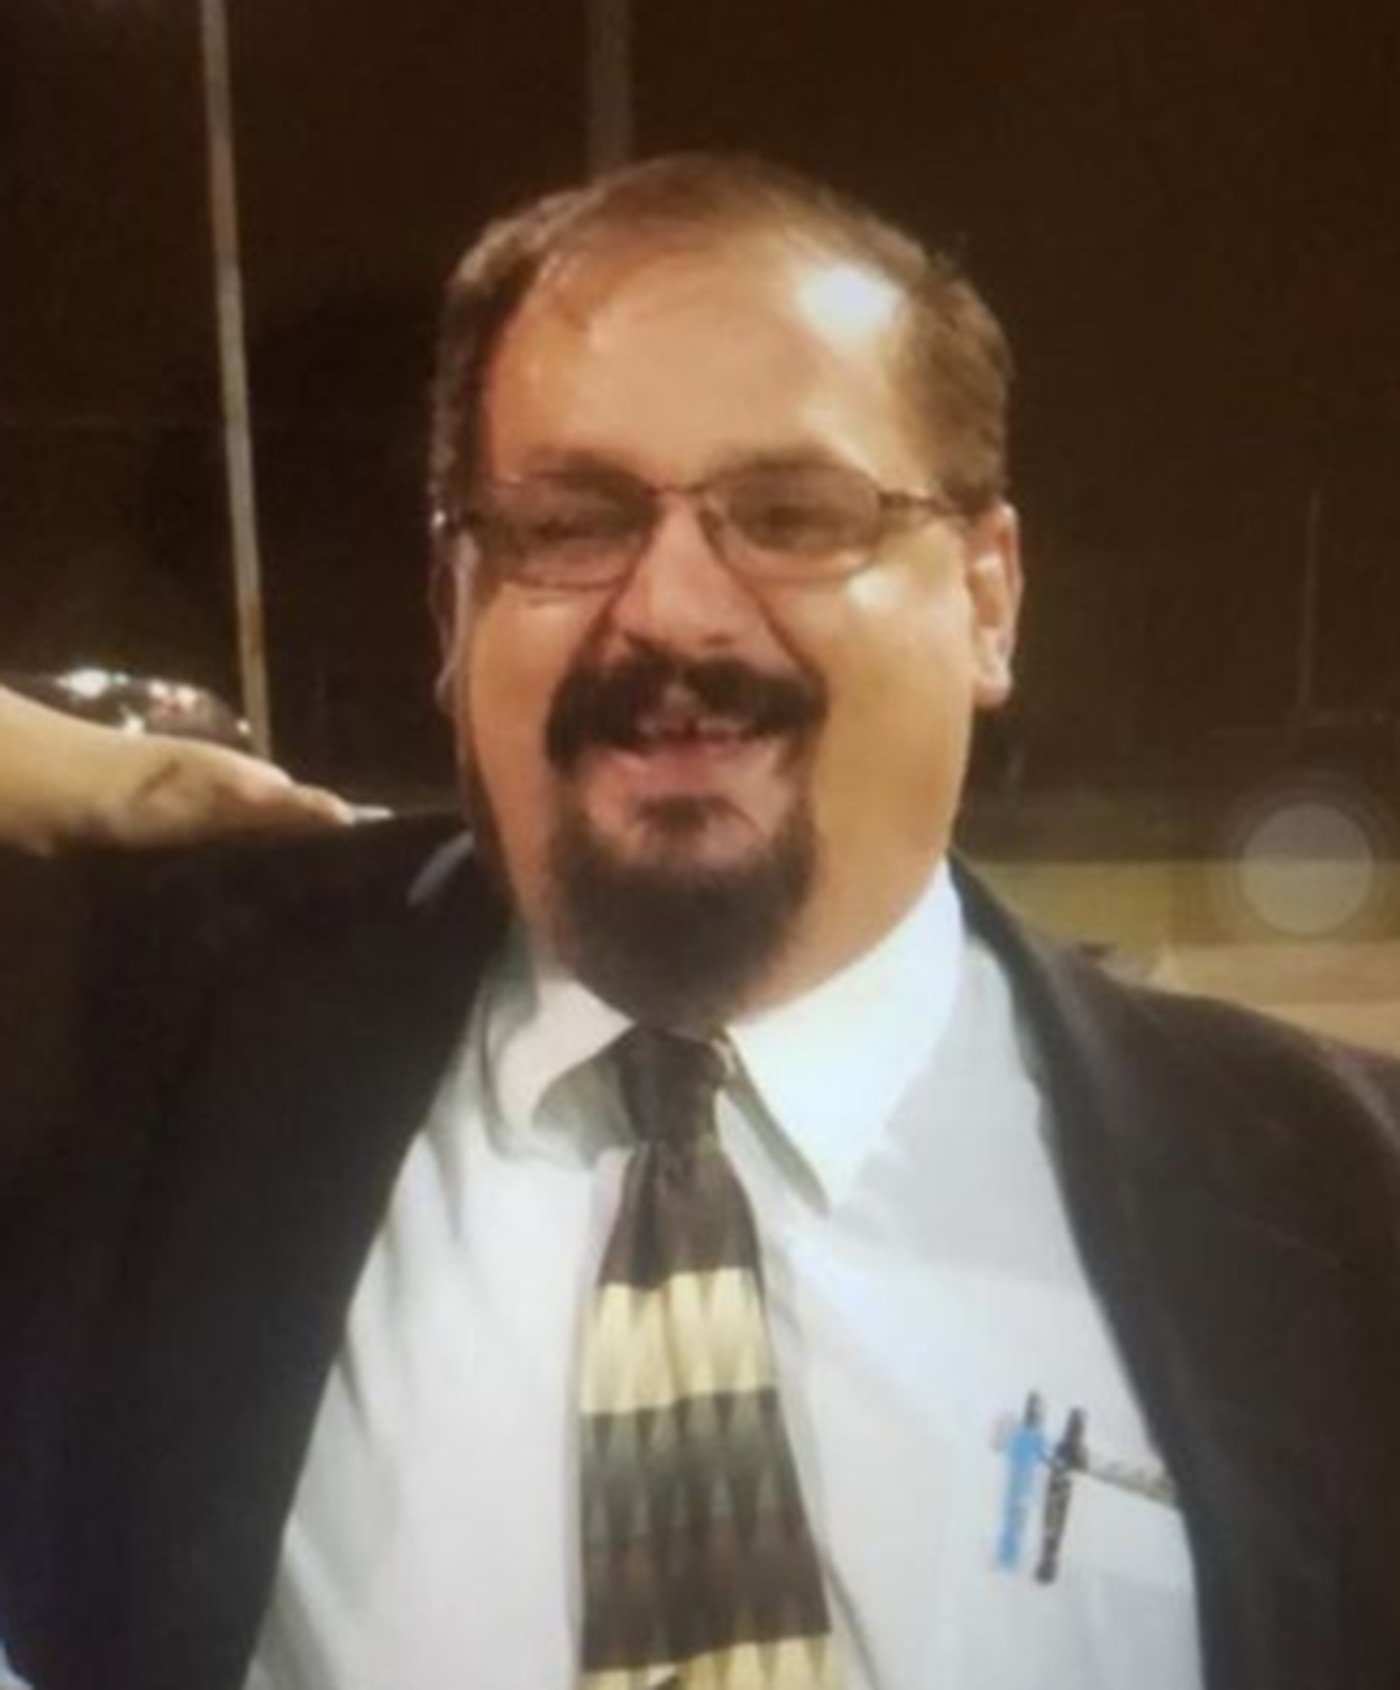 The body of missing Raymond man Stoney Dale Qualls was found in an abandoned building Friday morning; Source: MBI